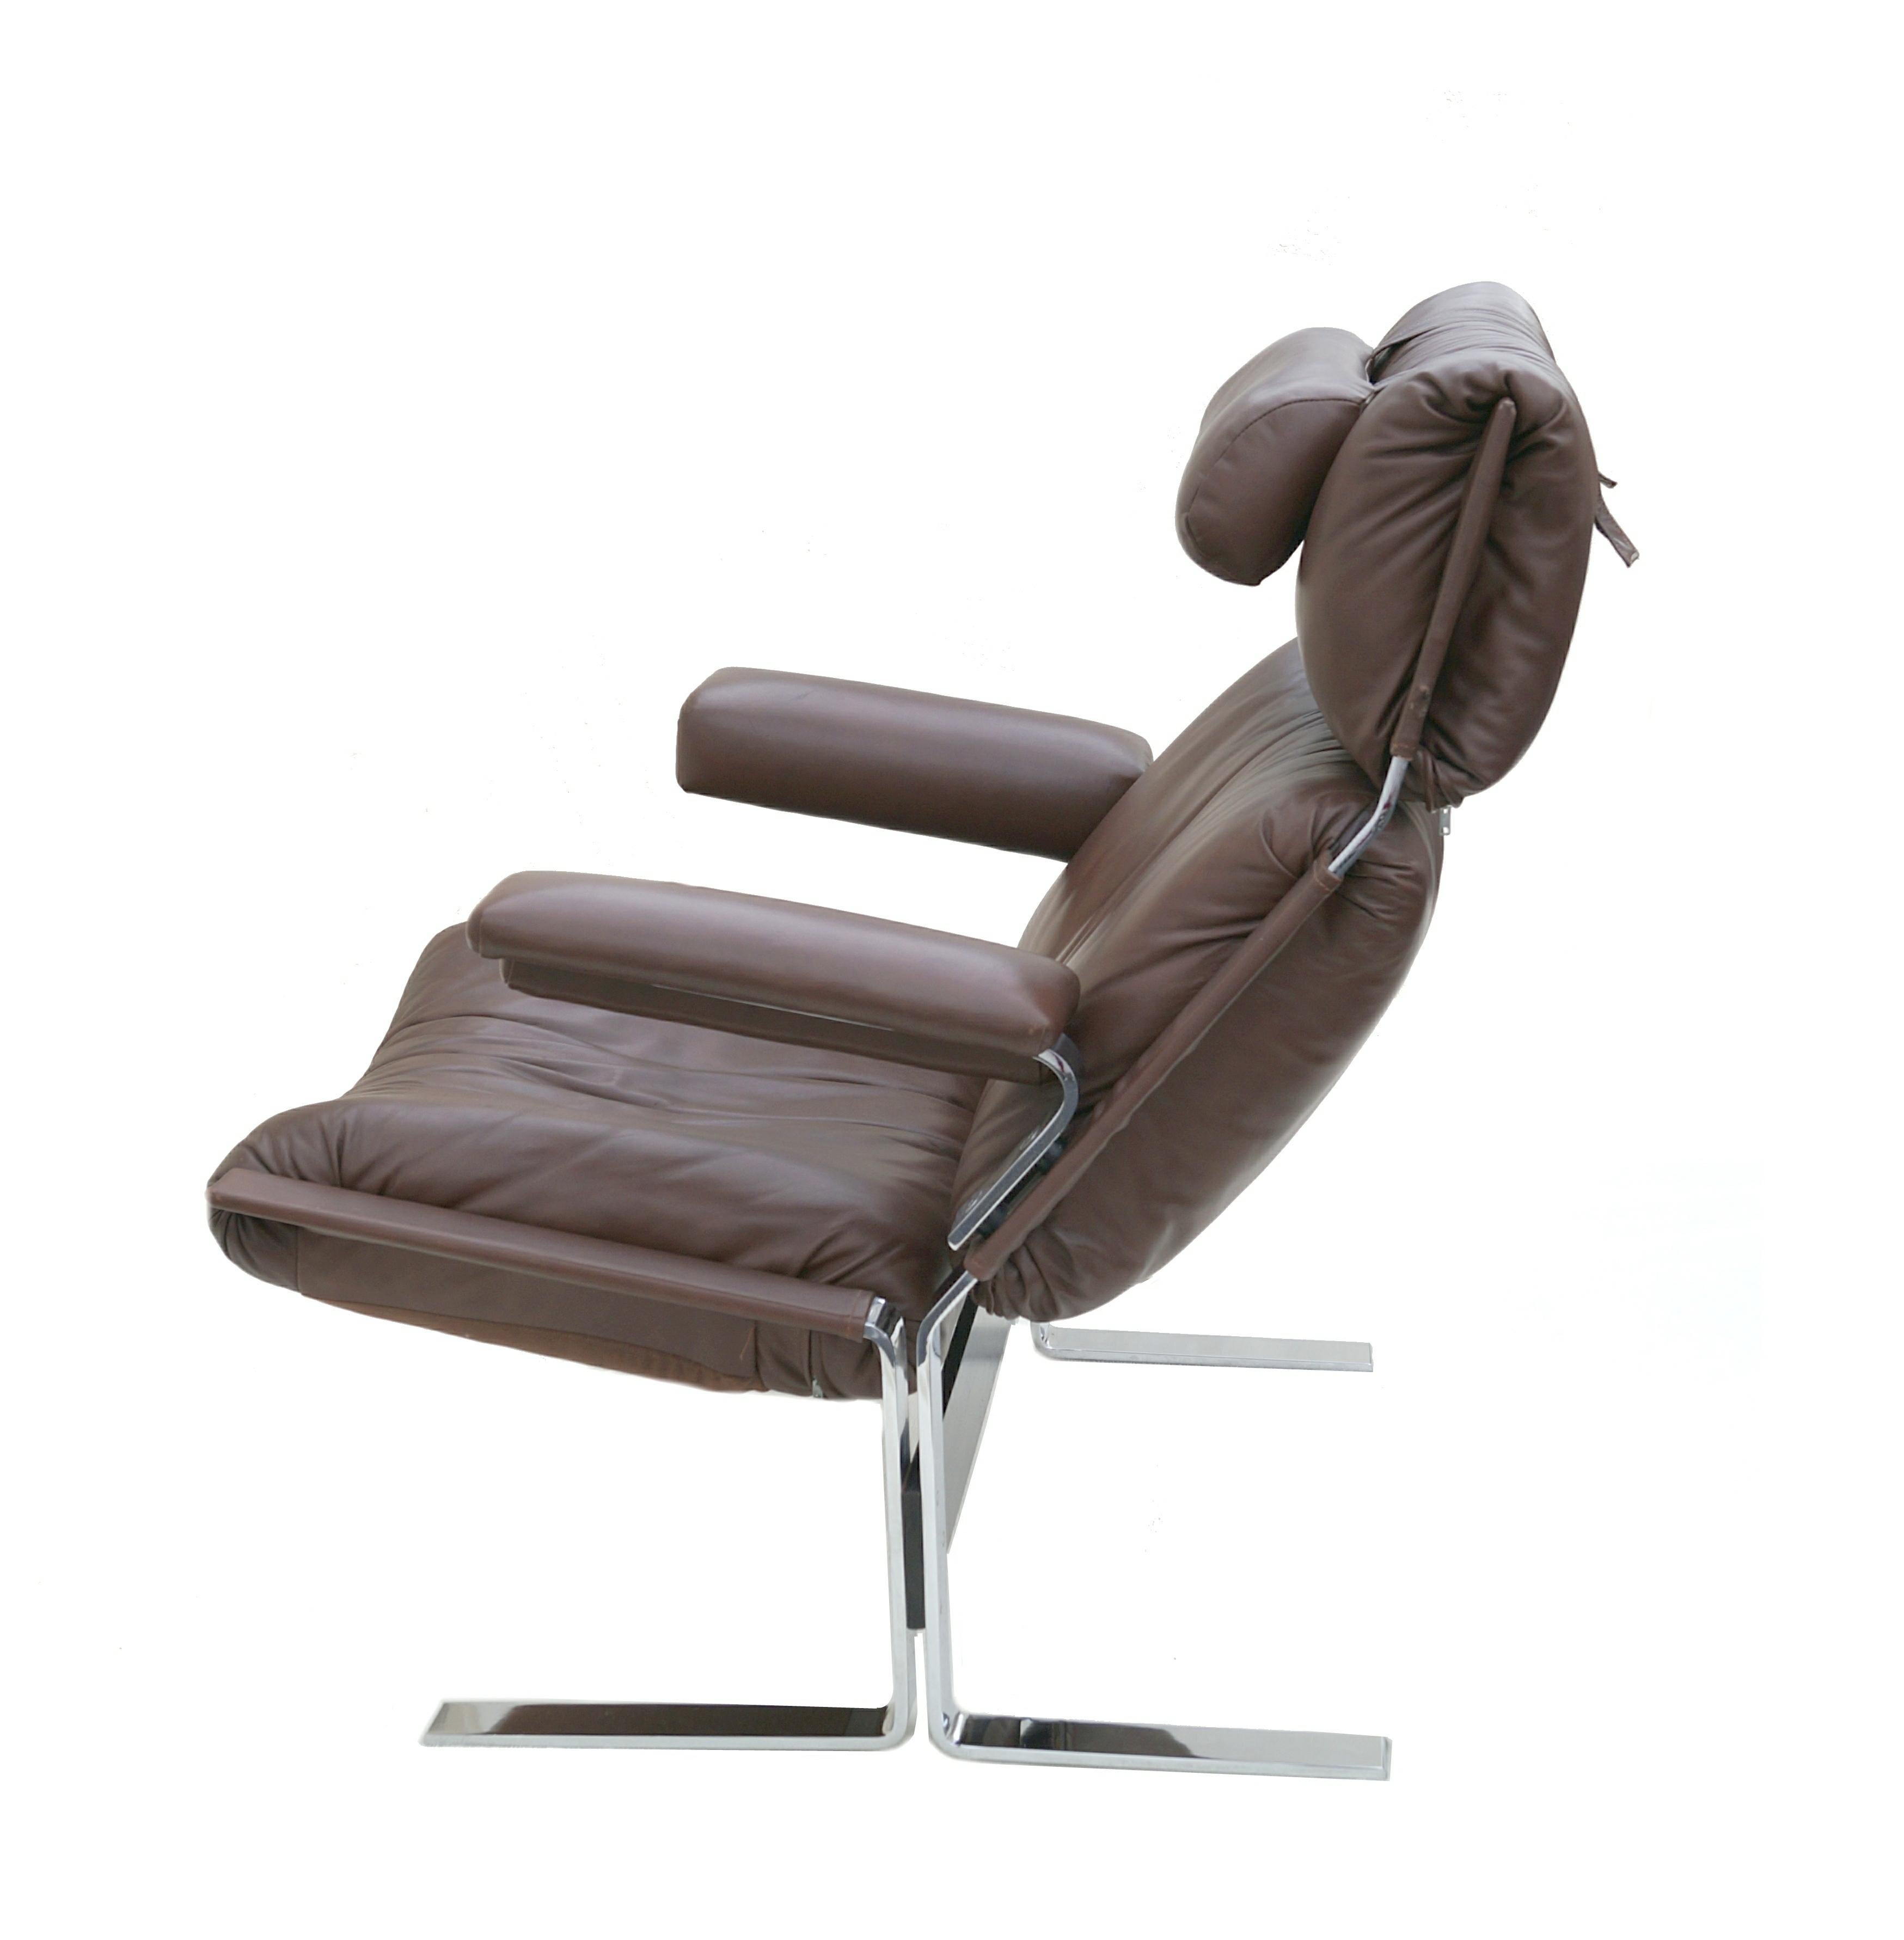 Richard Hersberger Pace Mid-Century Modern Leather & Chrome Lounge Chair Ottoman In Good Condition For Sale In Wayne, NJ